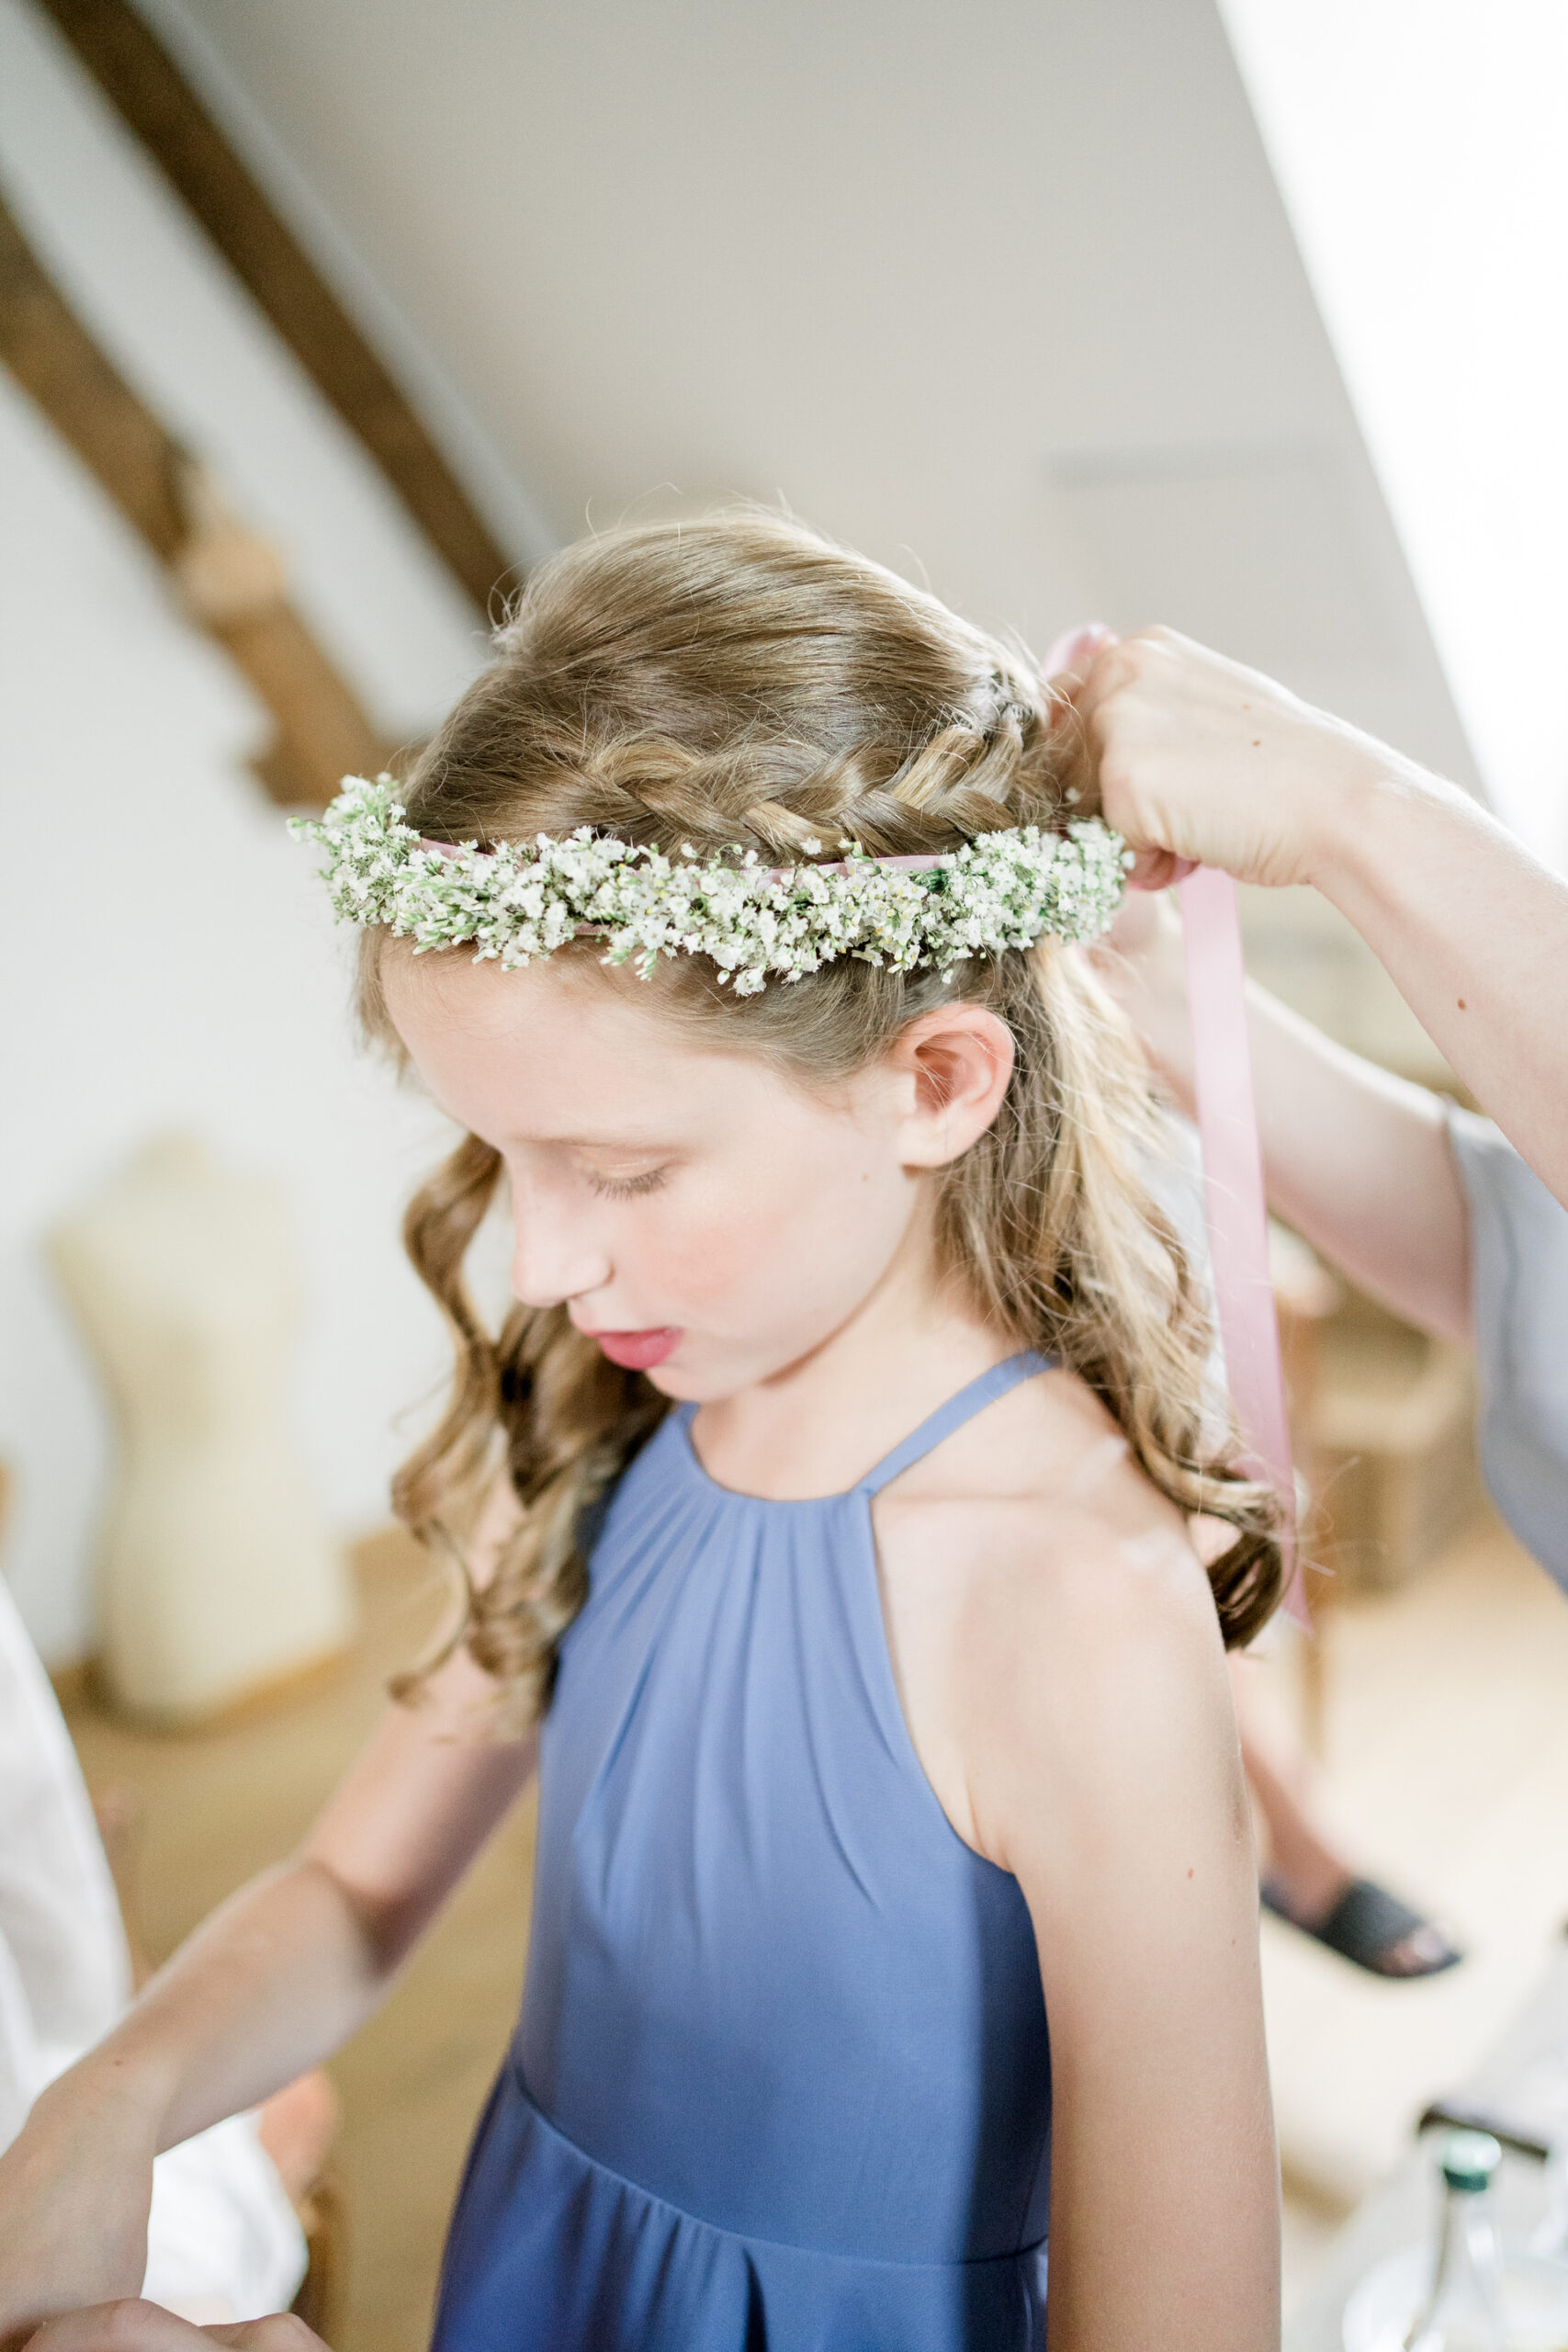 flower girl in blue dress with flower crown being tied